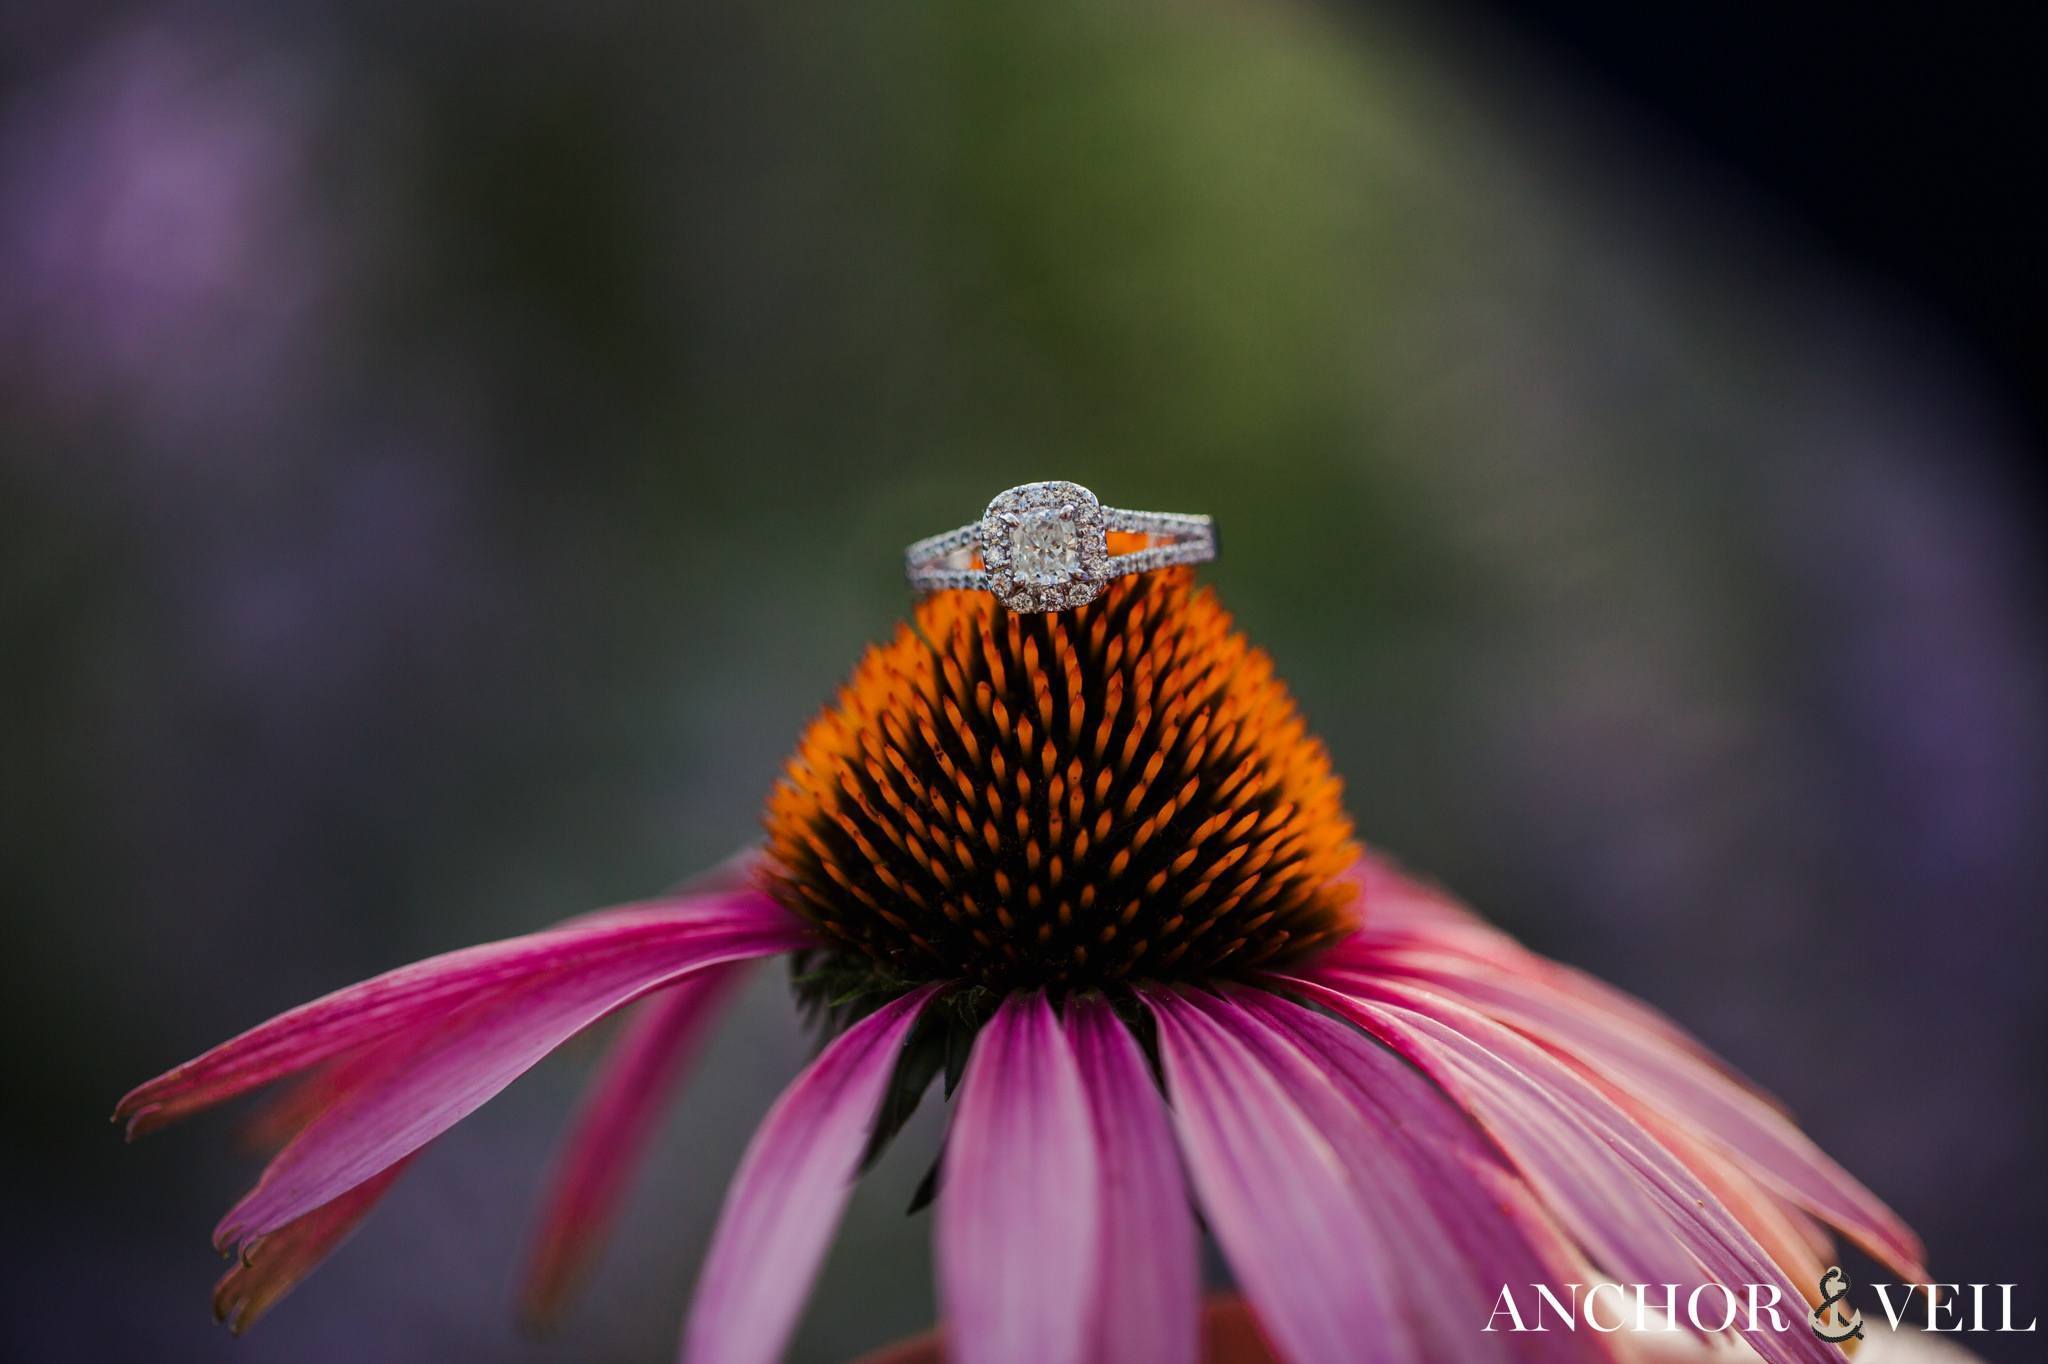 the flowers and the rings